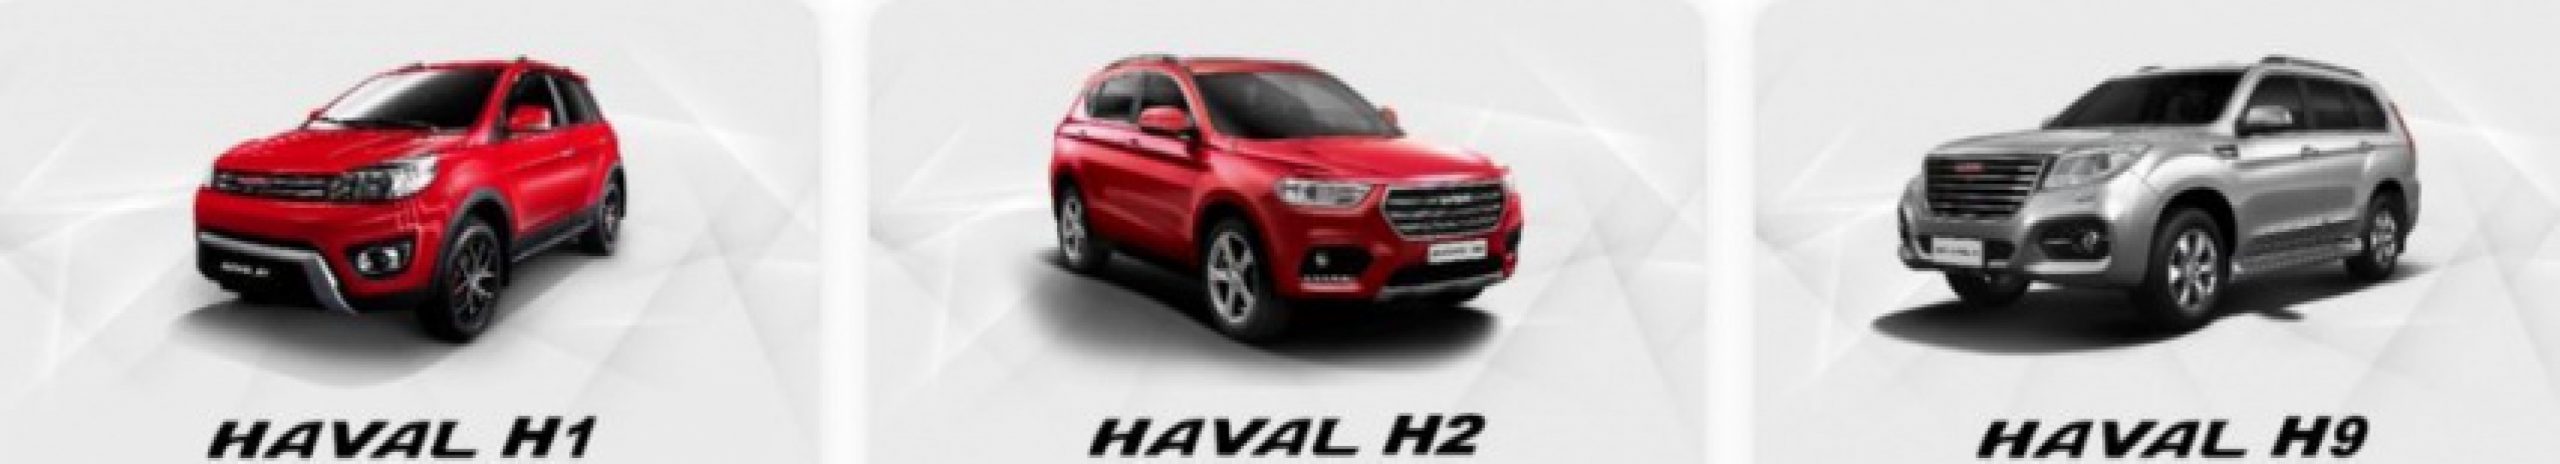 autos, cars, haval, reviews, go auto, great wall motor, haval h6, insights, proton x70, go auto rumoured to launch a car in 2021, will it be the haval h6?